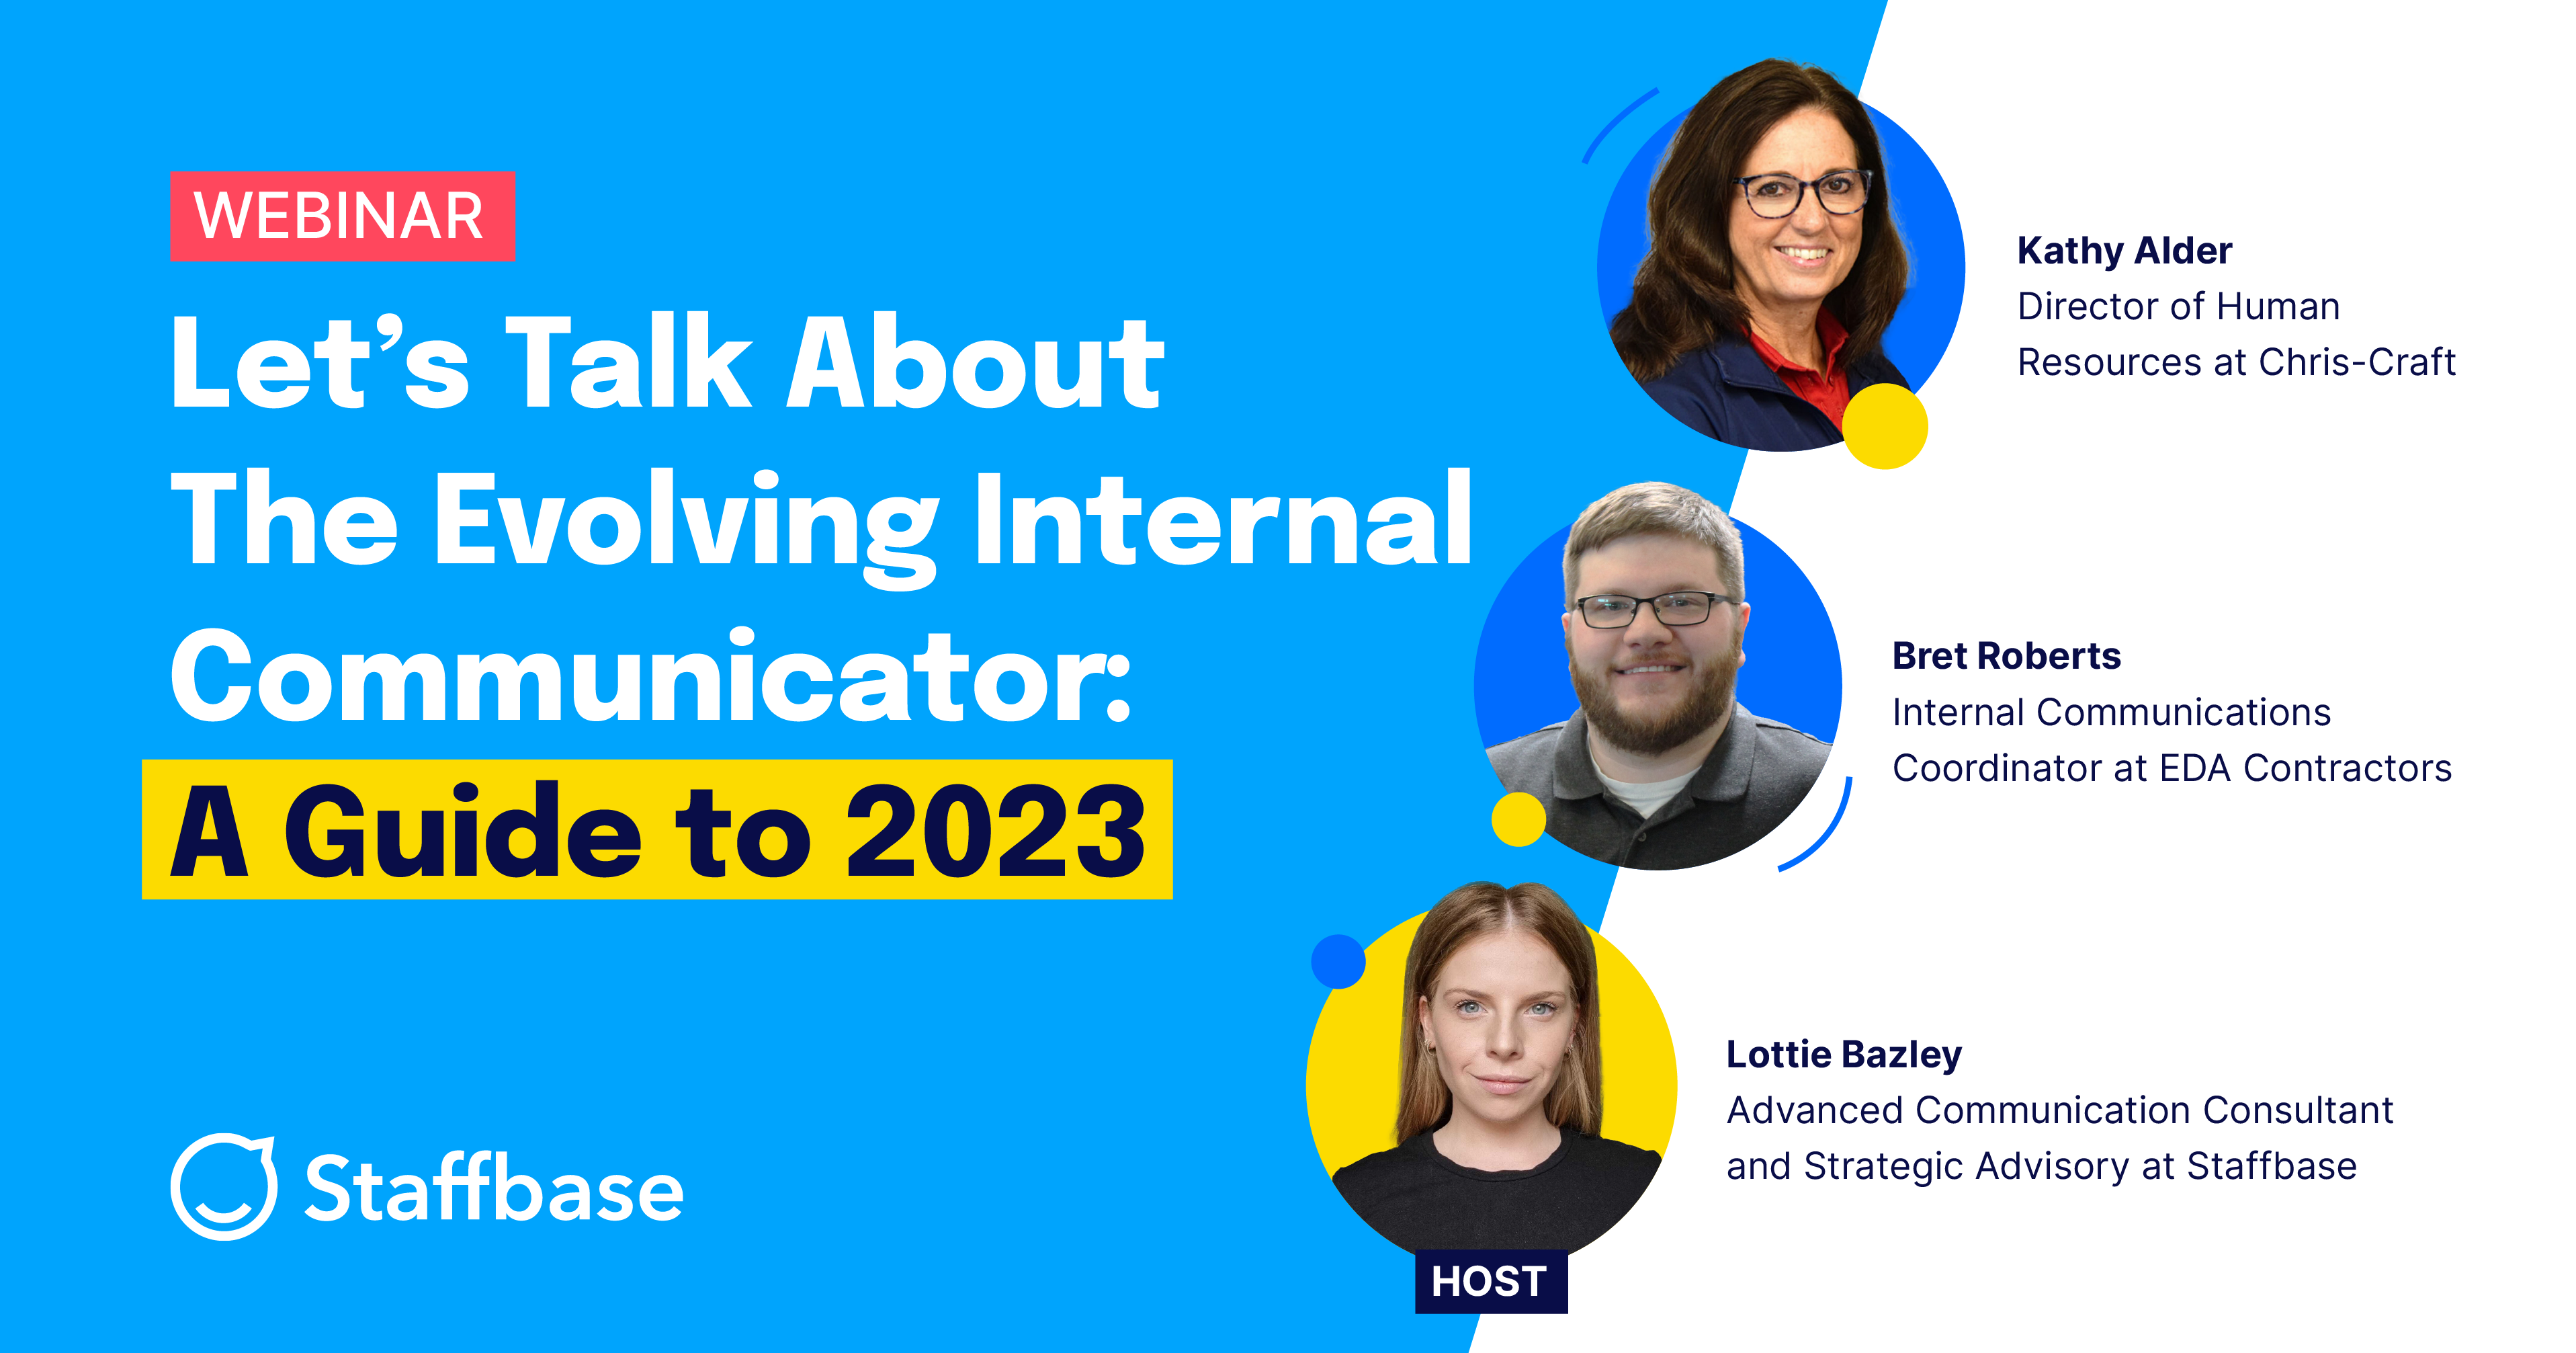 US_Lets Talk About The Evolving Internal Communicator - A Guide to 2023_ Assets_221123_avm_1200x630 - Speaker - No Date